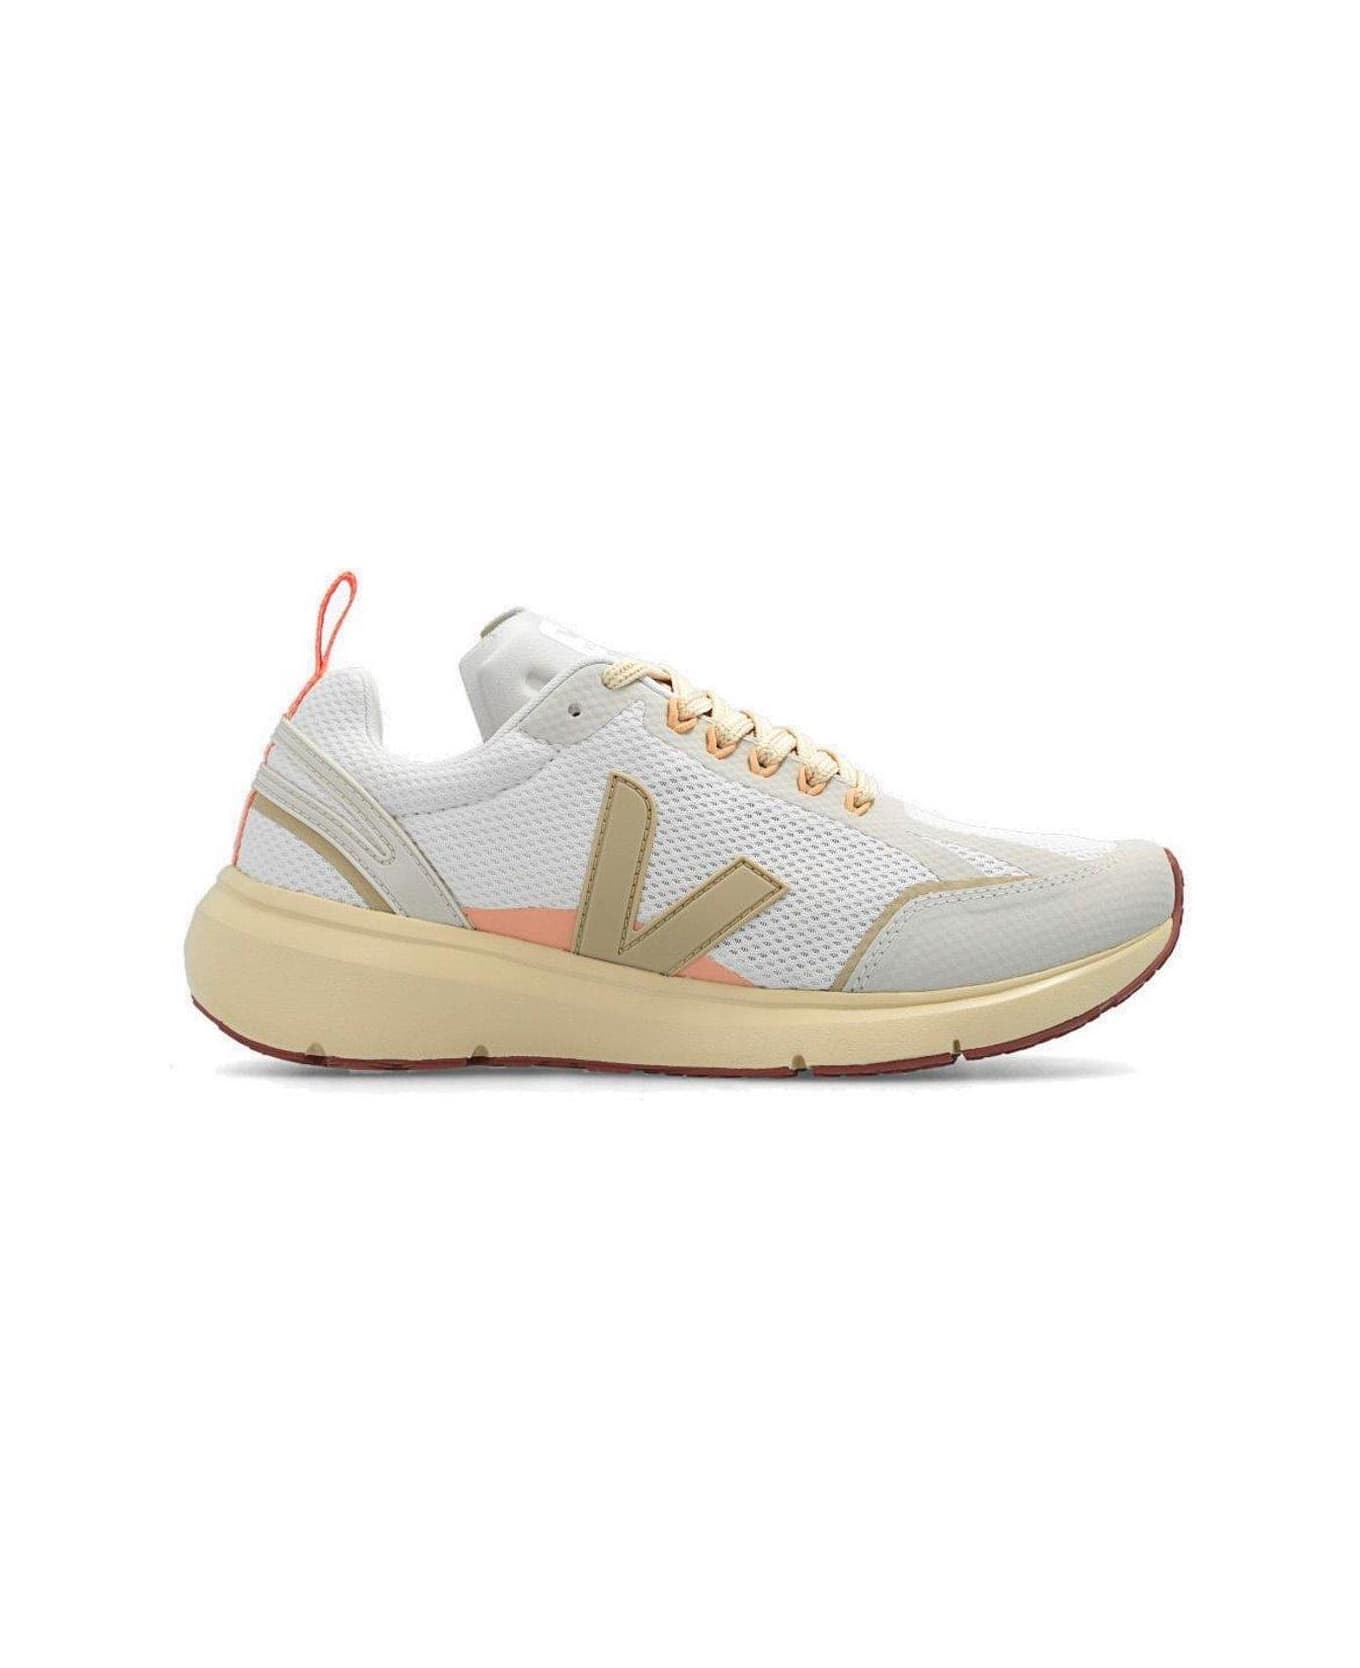 Veja Condor 2 Lace-up Sneakers - Gravel Almond